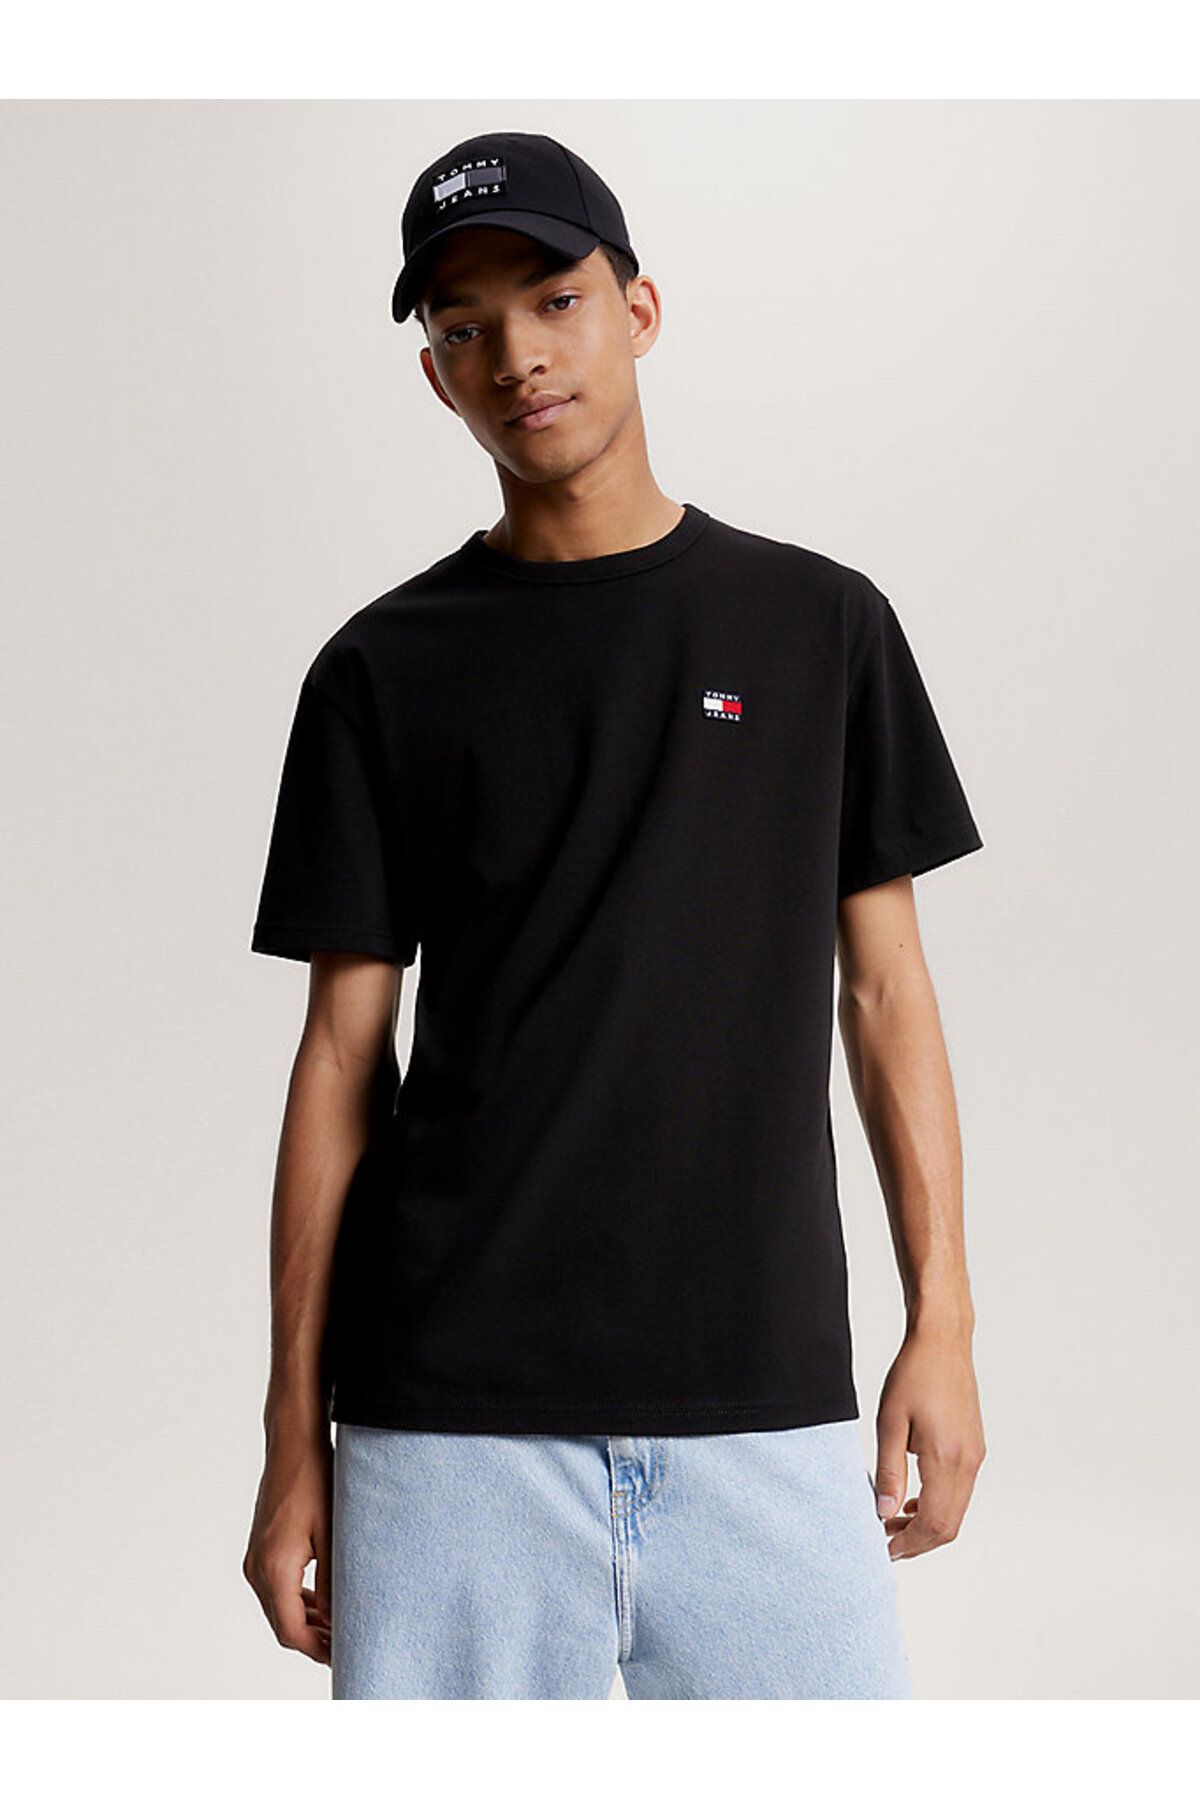 Tommy Hilfiger TJM CLSC TOMMY XS BADGE TEE